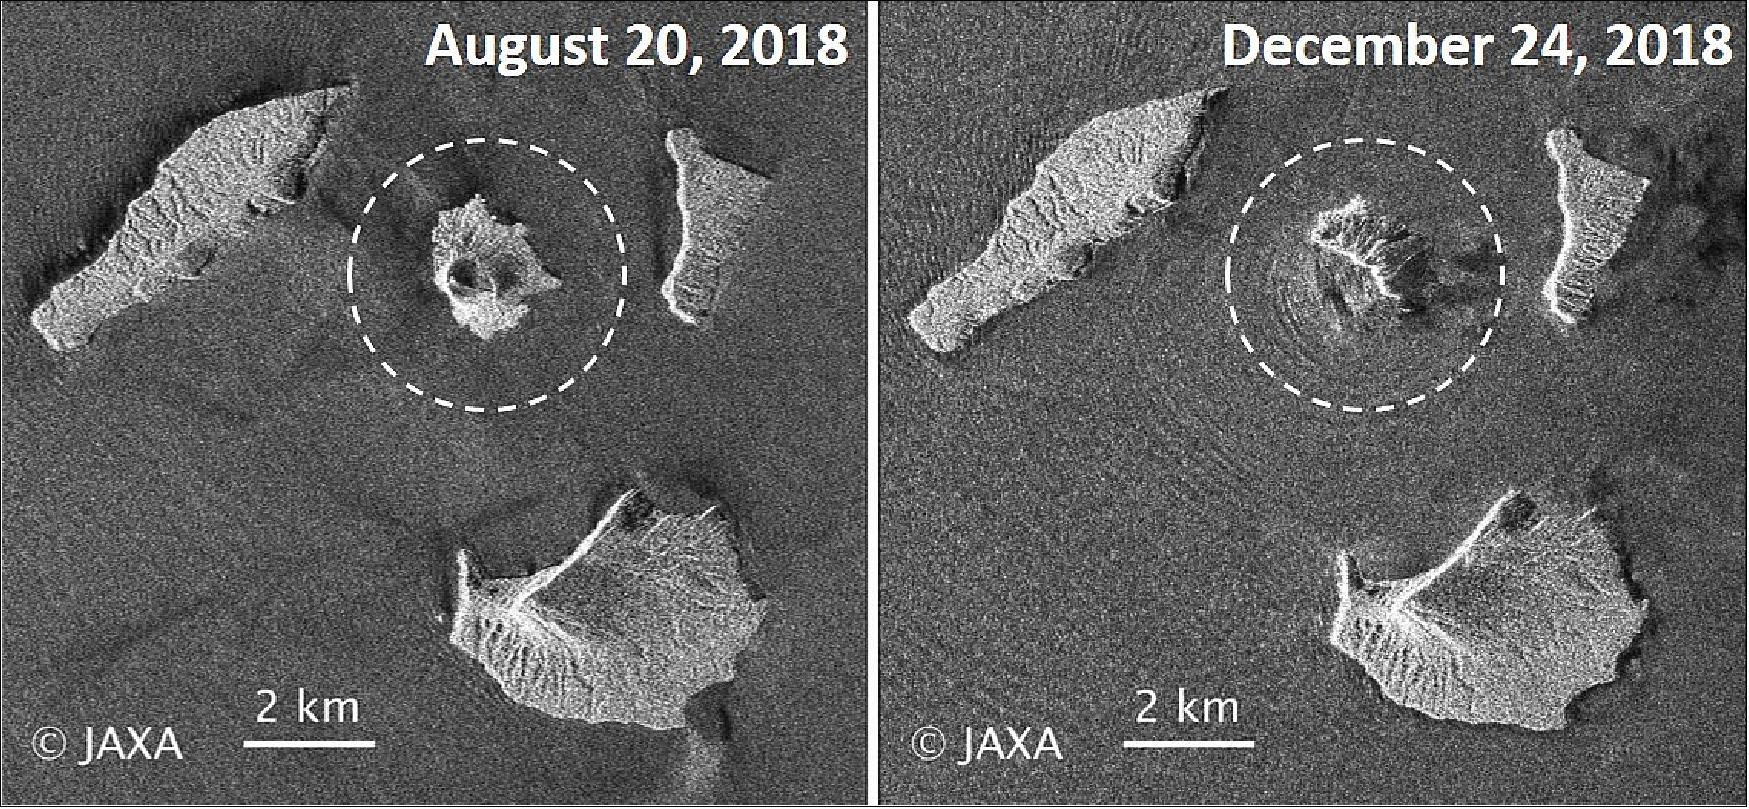 Figure 24: Comparison of the two HH amplitude images acquired before (August 20, 2018) and after (December 24, 2018) the eruption. The white-dotted circle shows Anak Krakatau Island (image credit: JAXA/EORC)